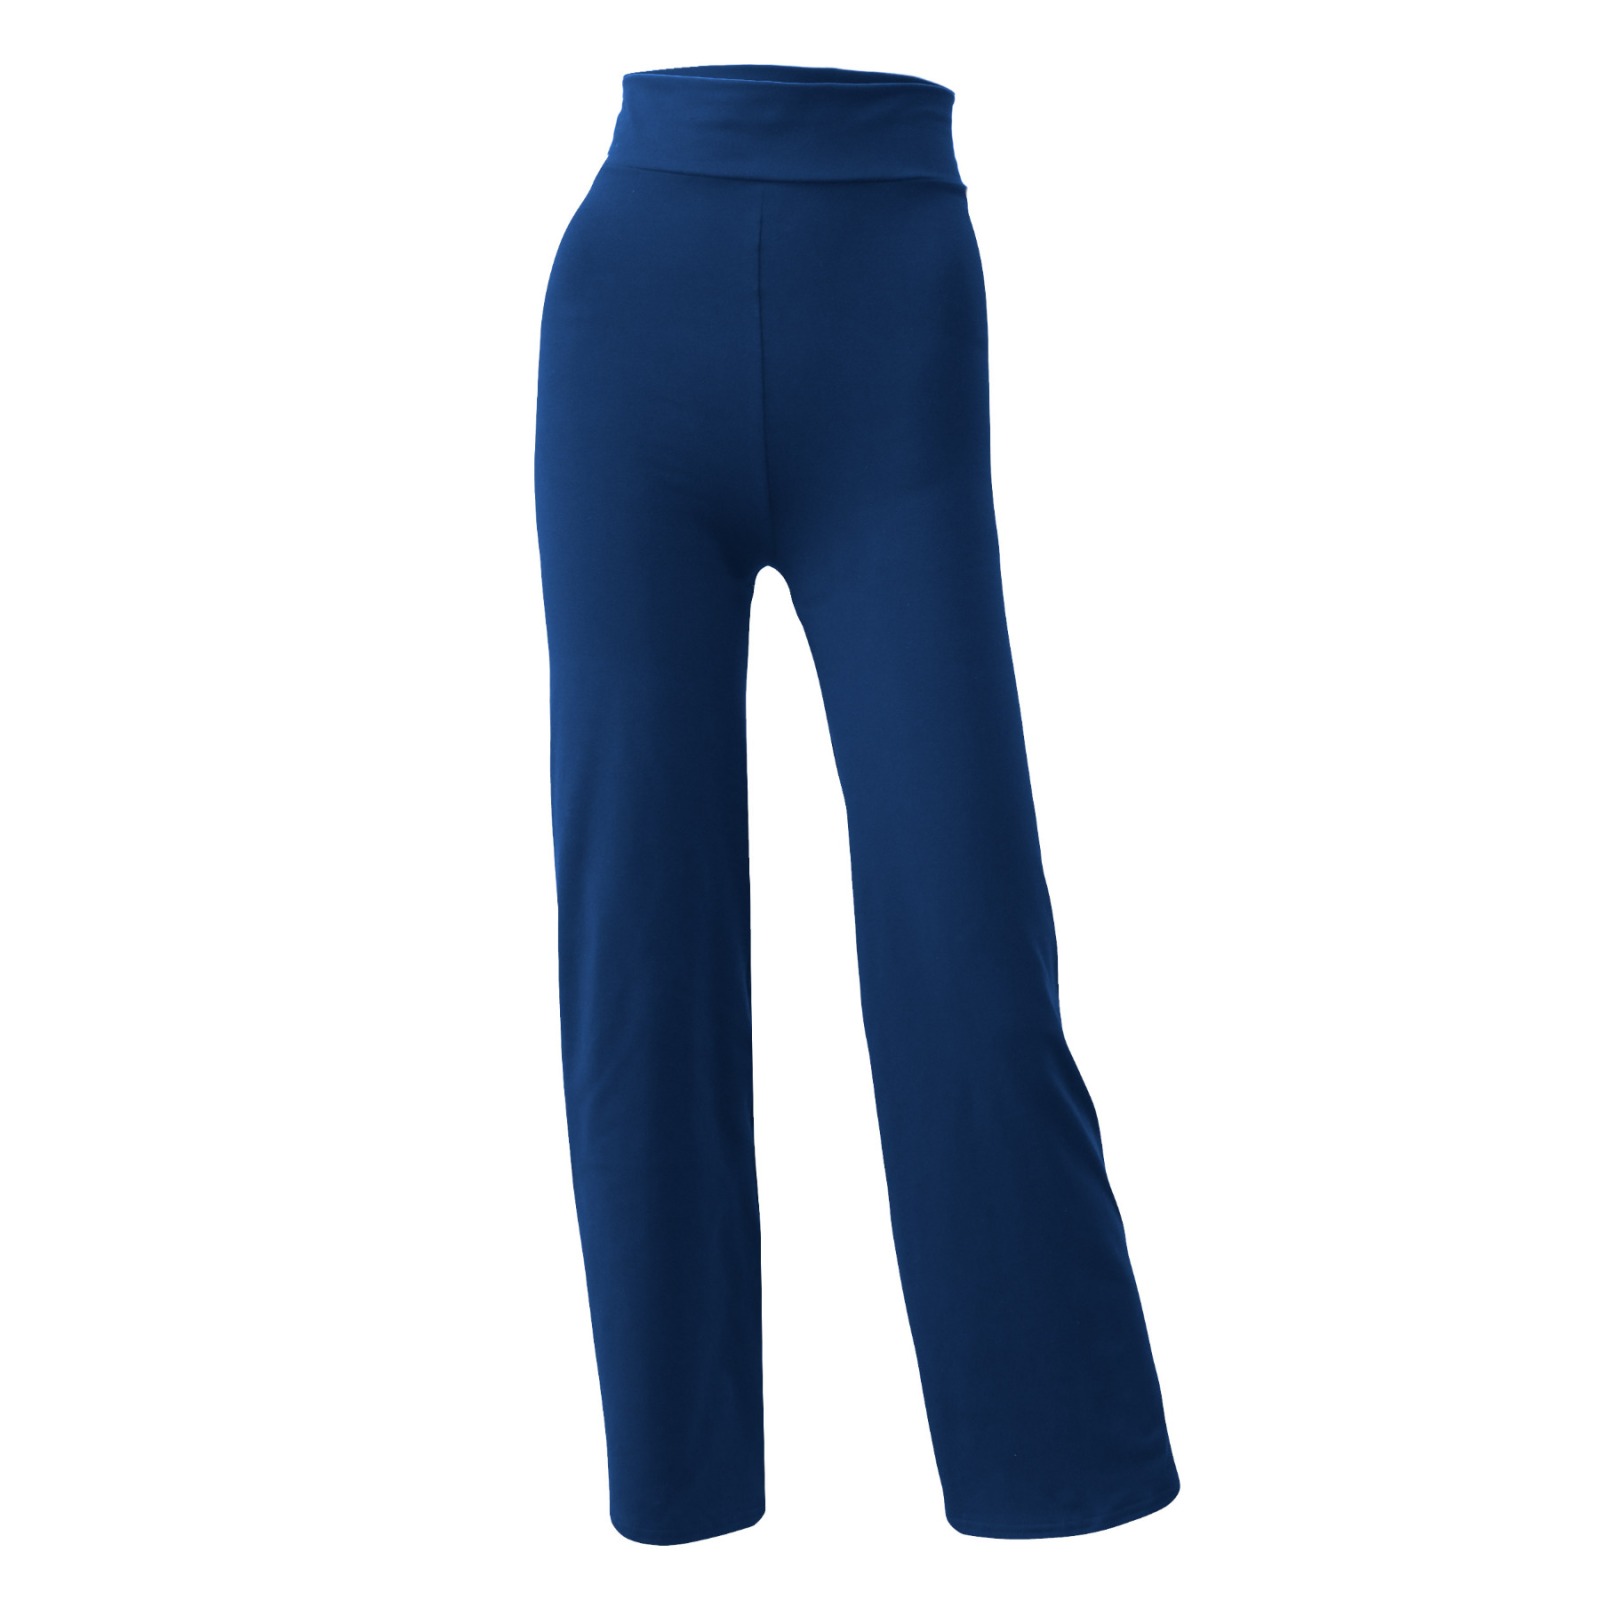 Yoga pants Relaxed Fit dark blue